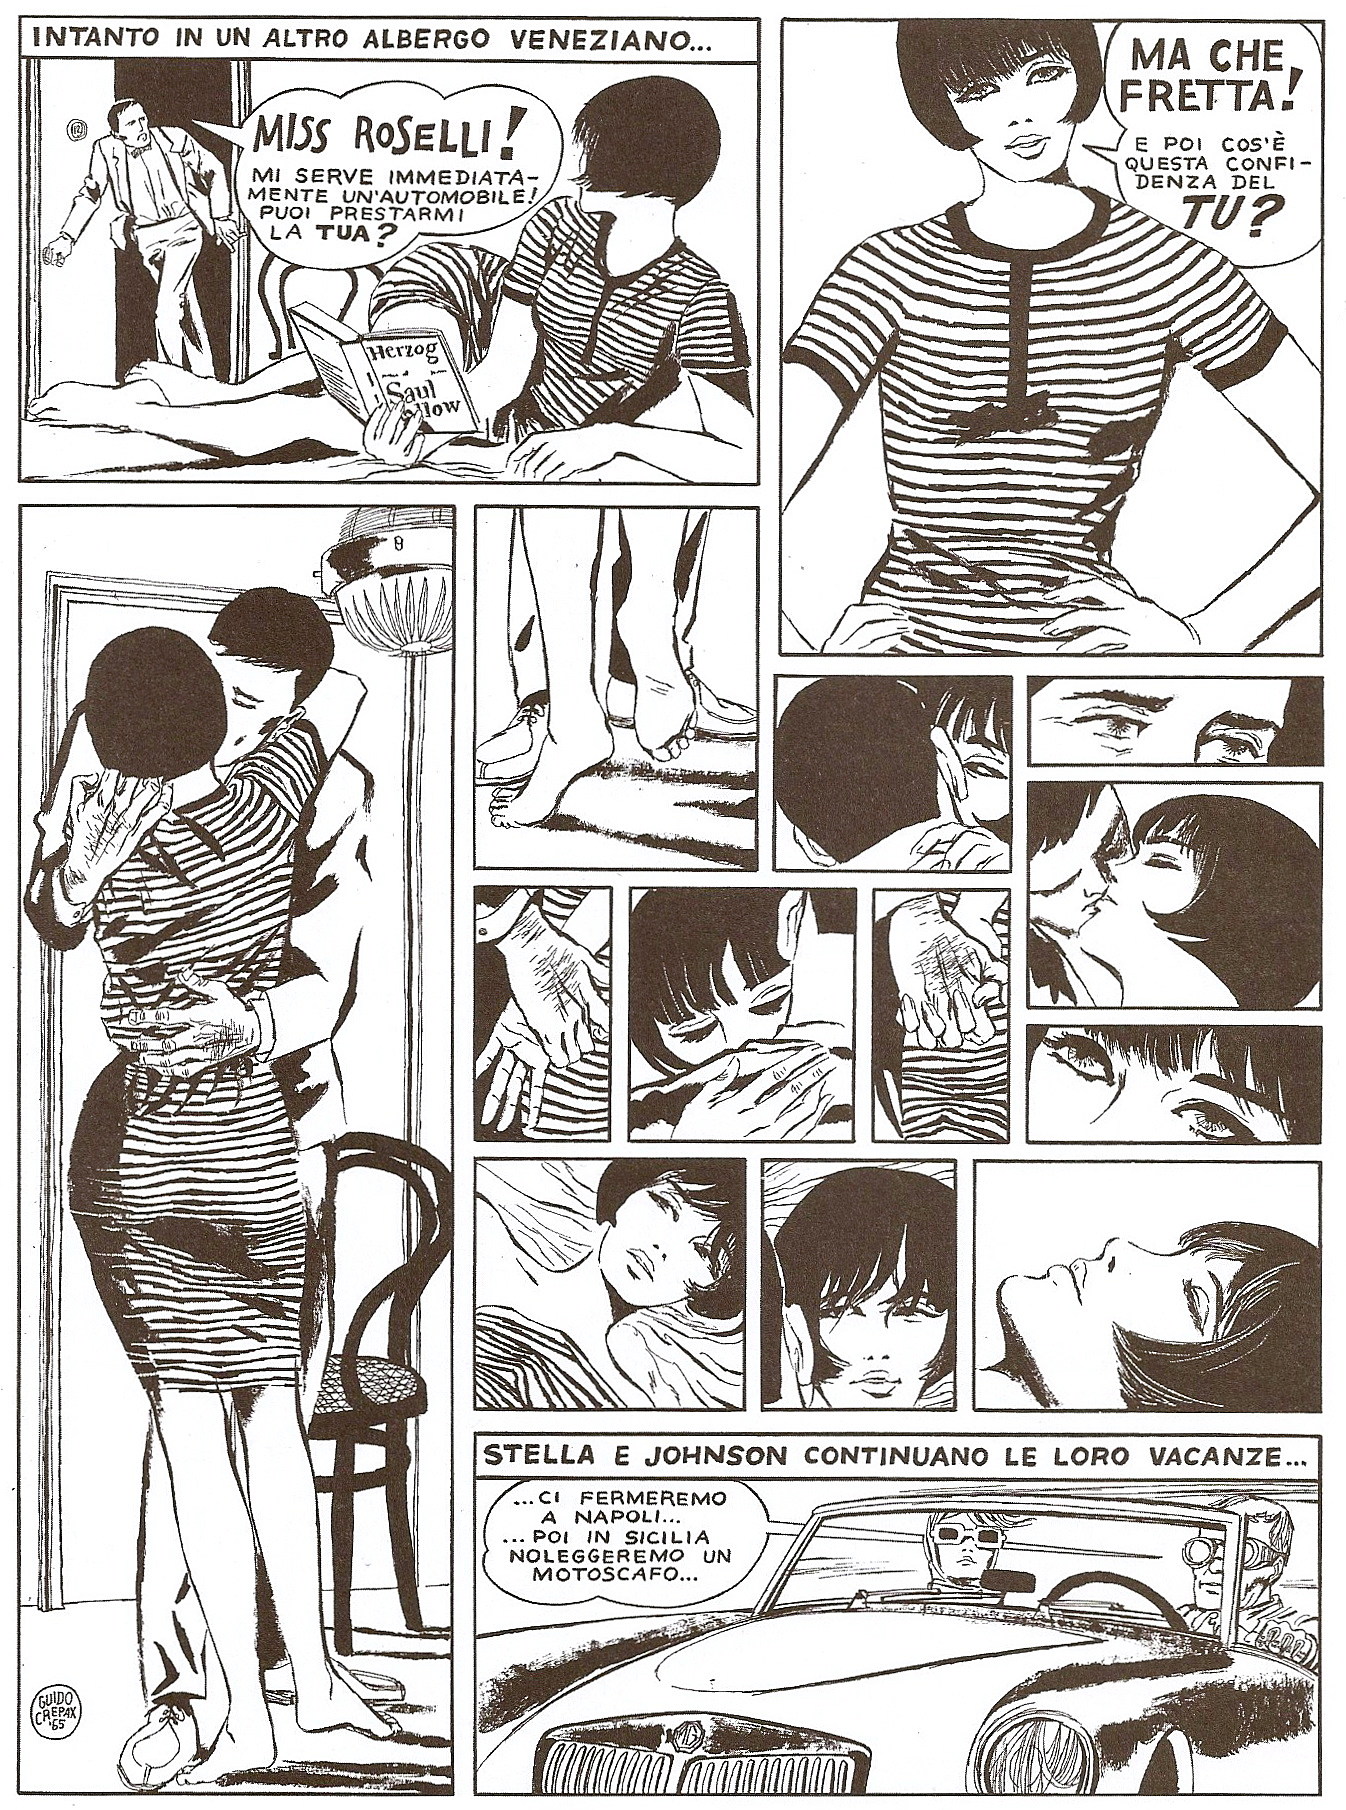 Guido Crepax's 'Valentina': The High Water Mark of ...